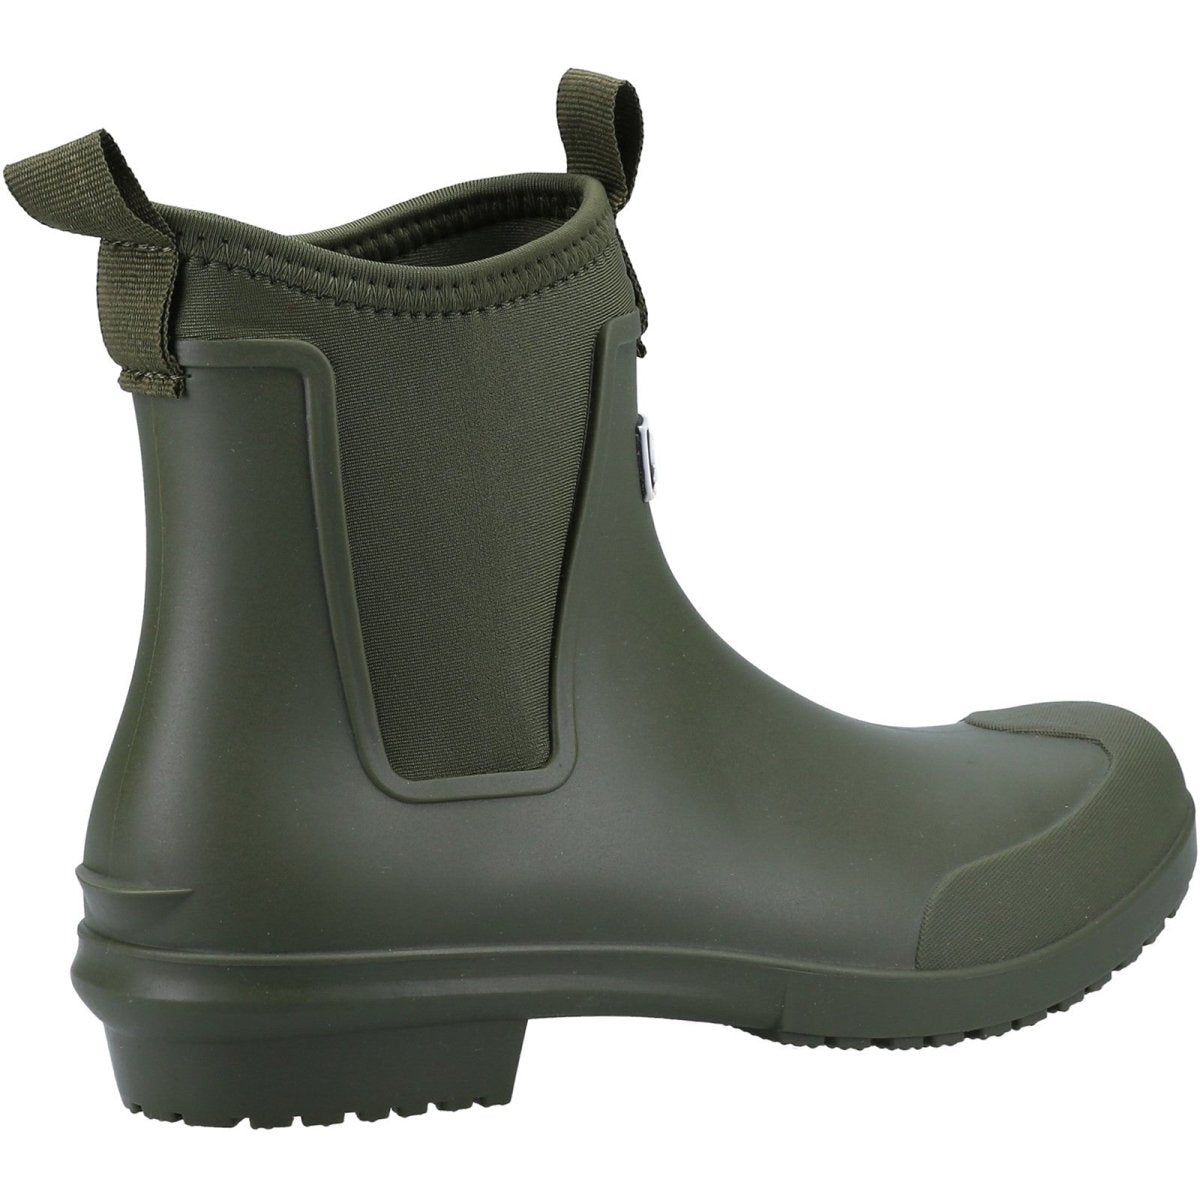 Cotswold Grosvenor Ladies Ankle Wellington Boots - Shoe Store Direct